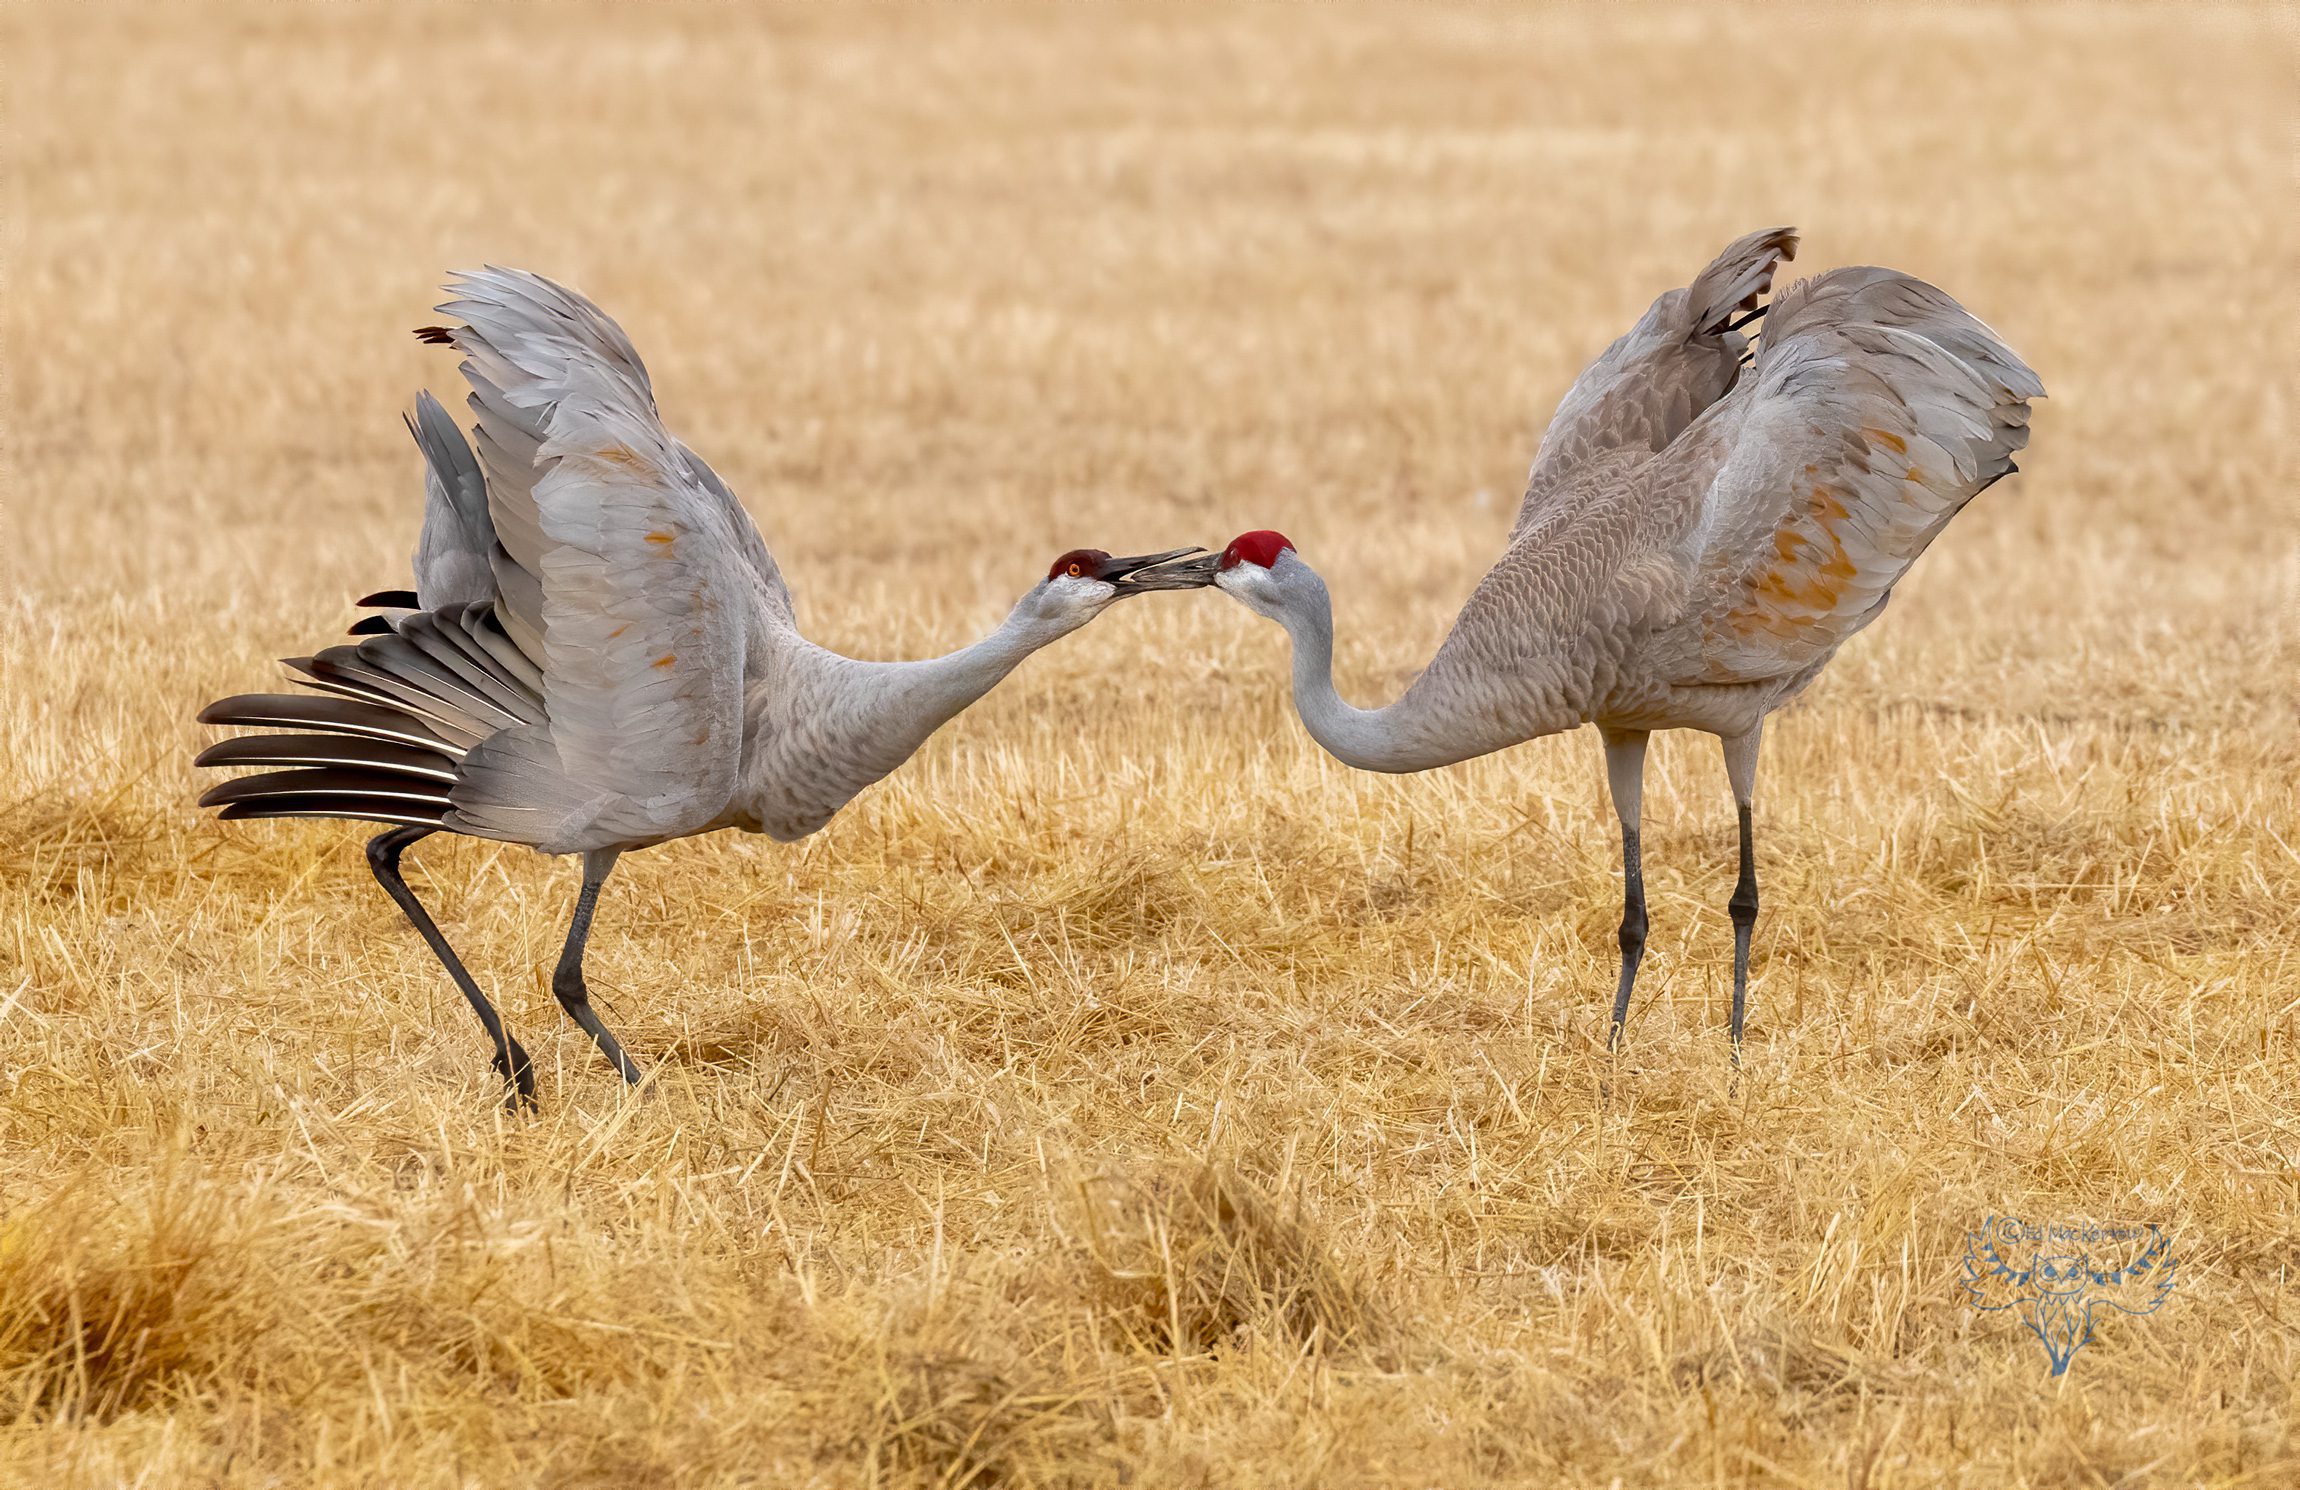 Two Sandhill Cranes kissing during courtship dance